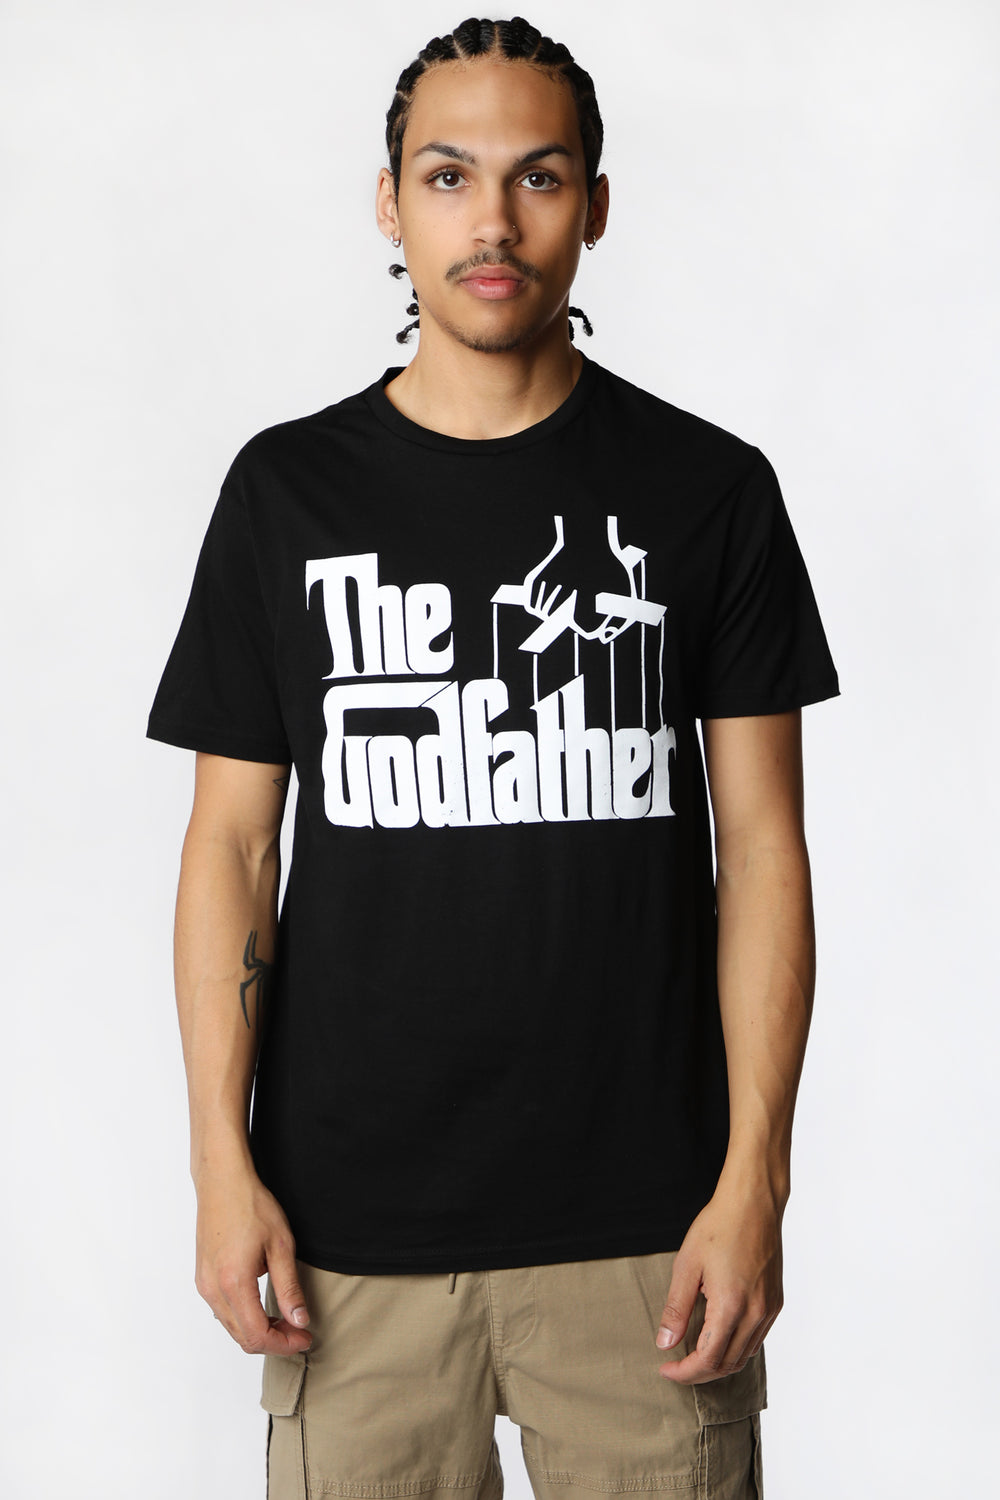 Mens The Godfather T-Shirt Mens The Godfather T-Shirt